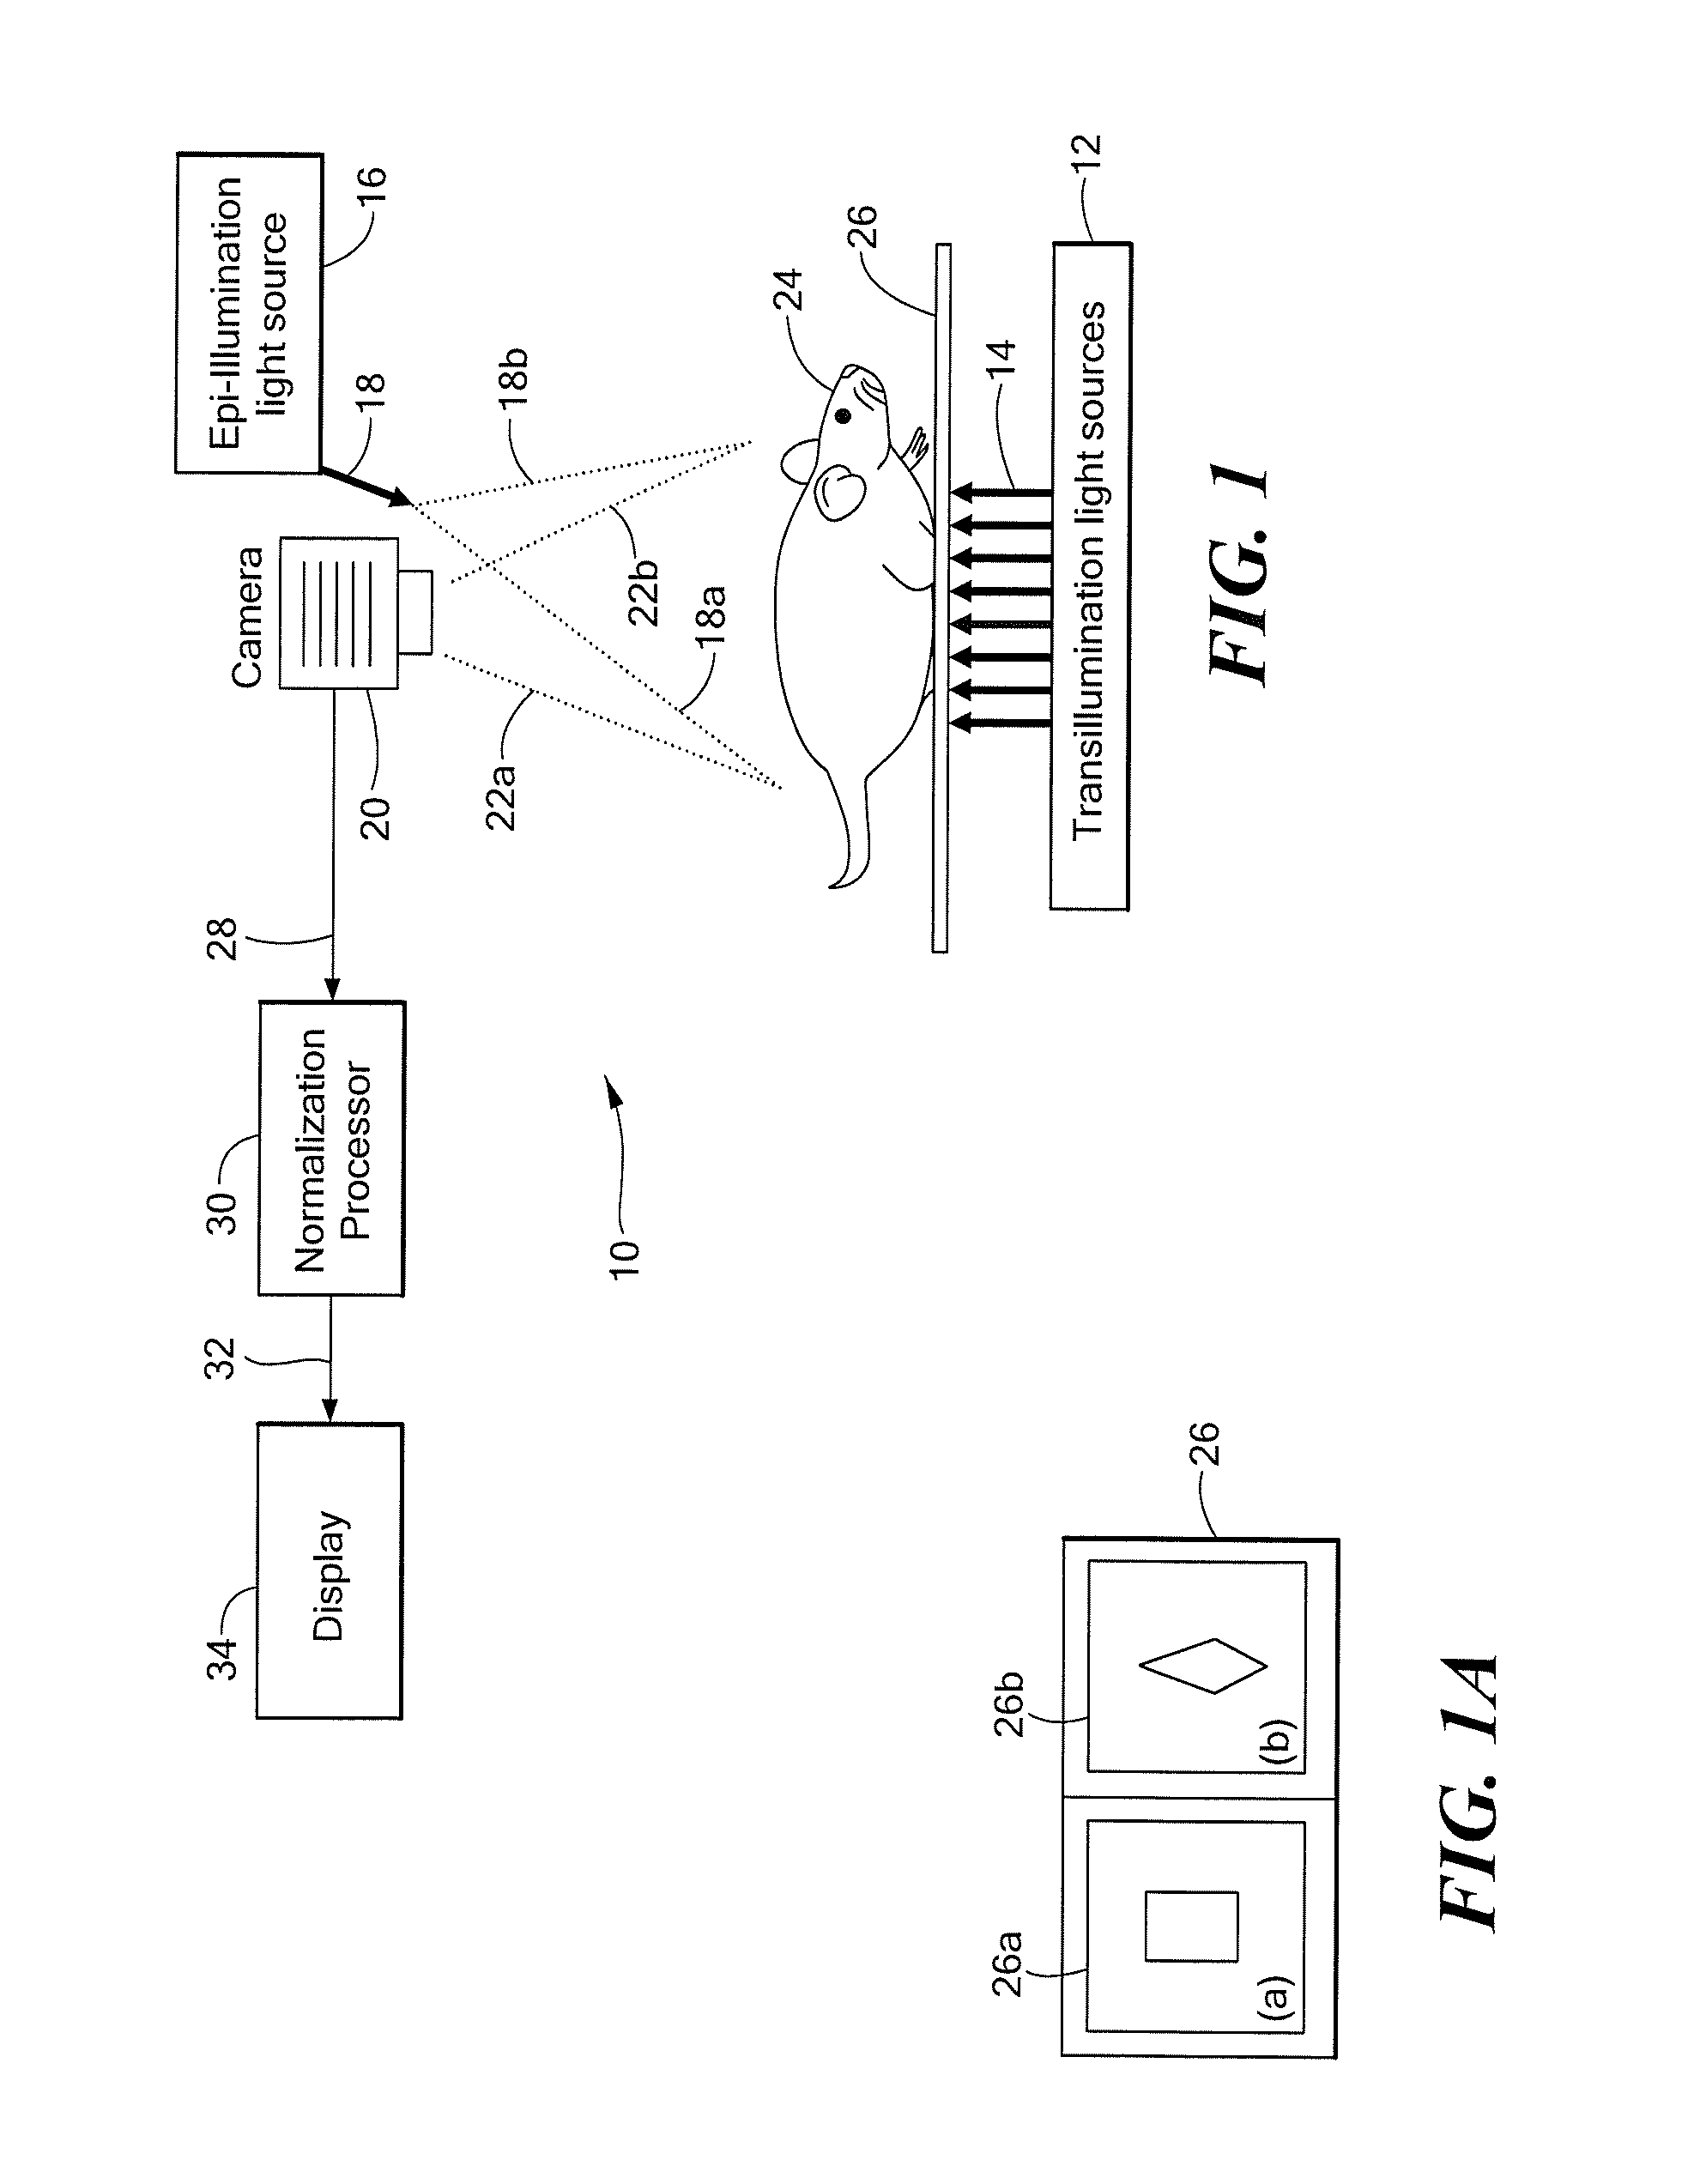 System and Method for Normalized Diffuse Emission Epi-illumination Imaging and Normalized Diffuse Emission Transillumination Imaging